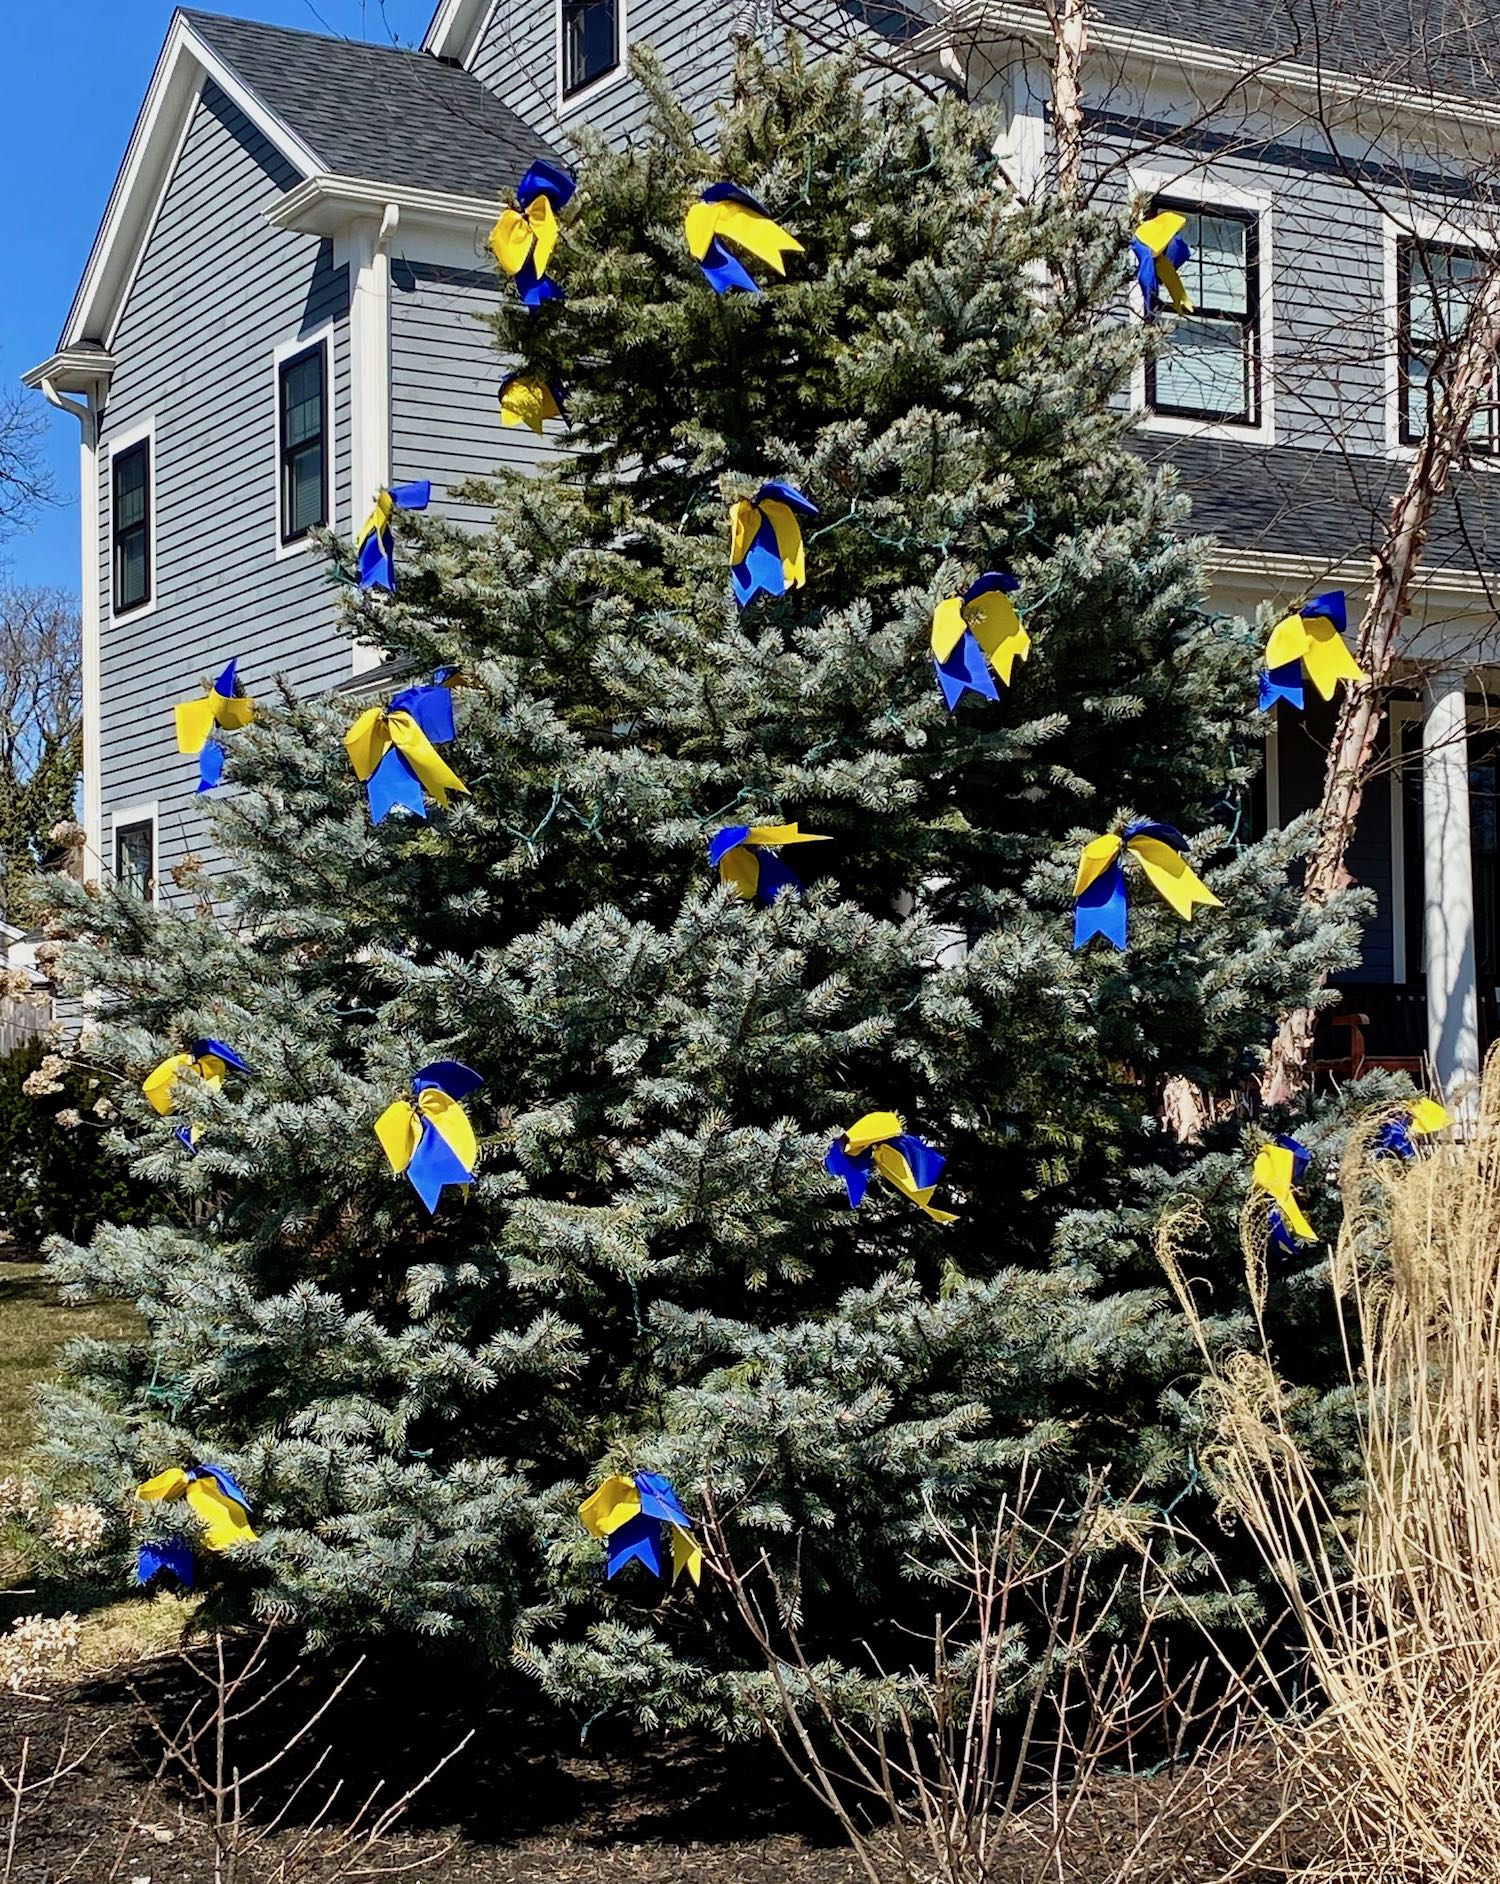 It's the weekend! Number 239, A Tree Adorned with the Colors of the Ukrainian Flag in Arlington, MA